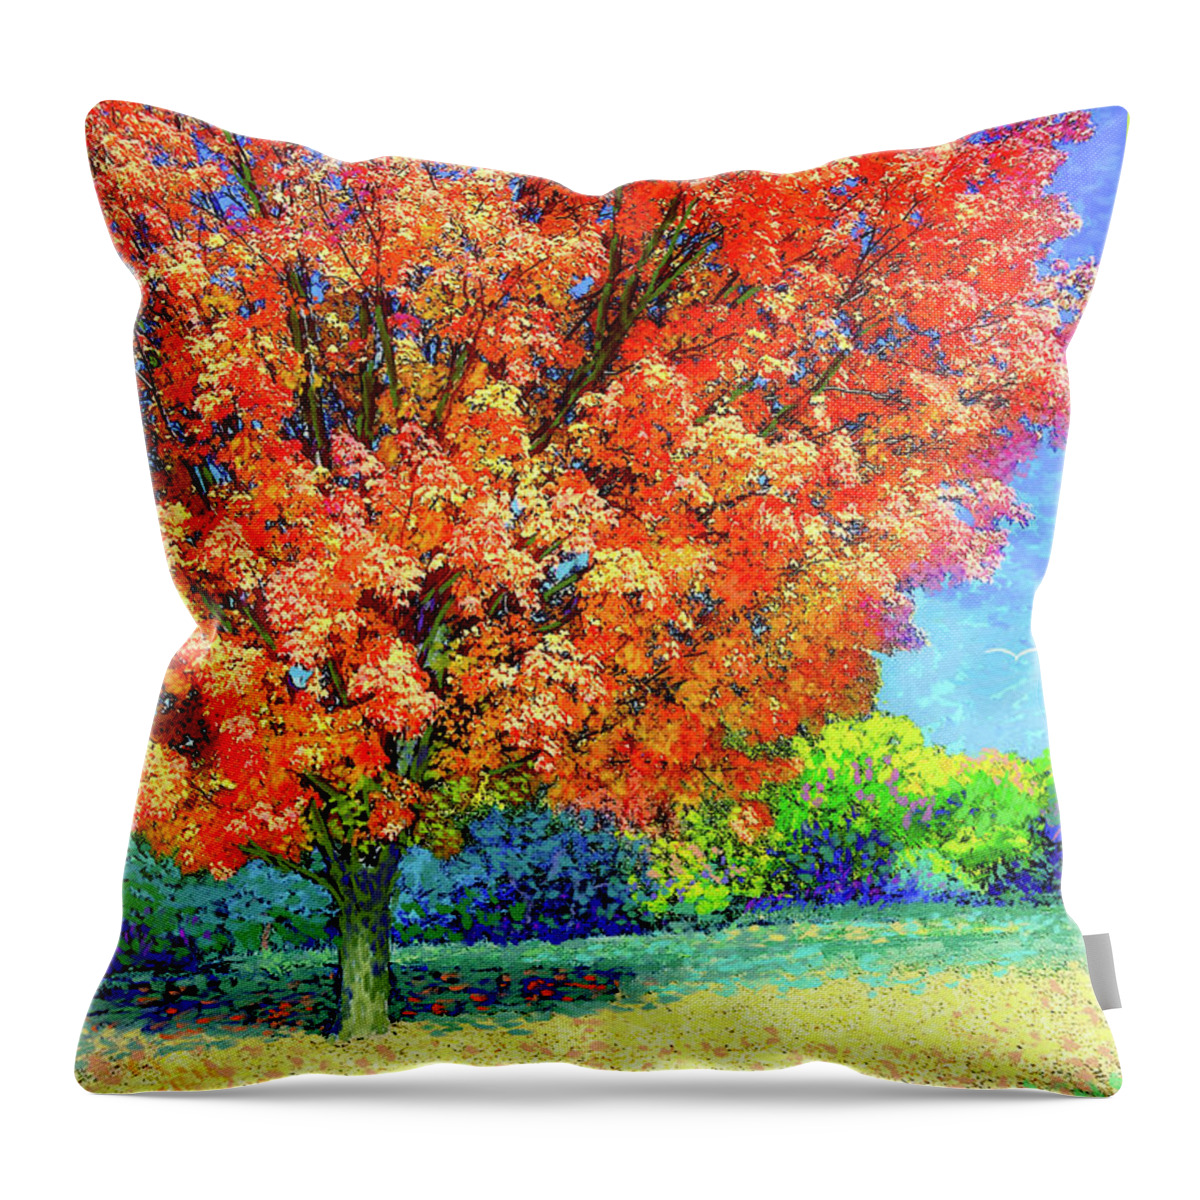 Landscape Throw Pillow featuring the painting Sugar Maple Sunshine by Jane Small